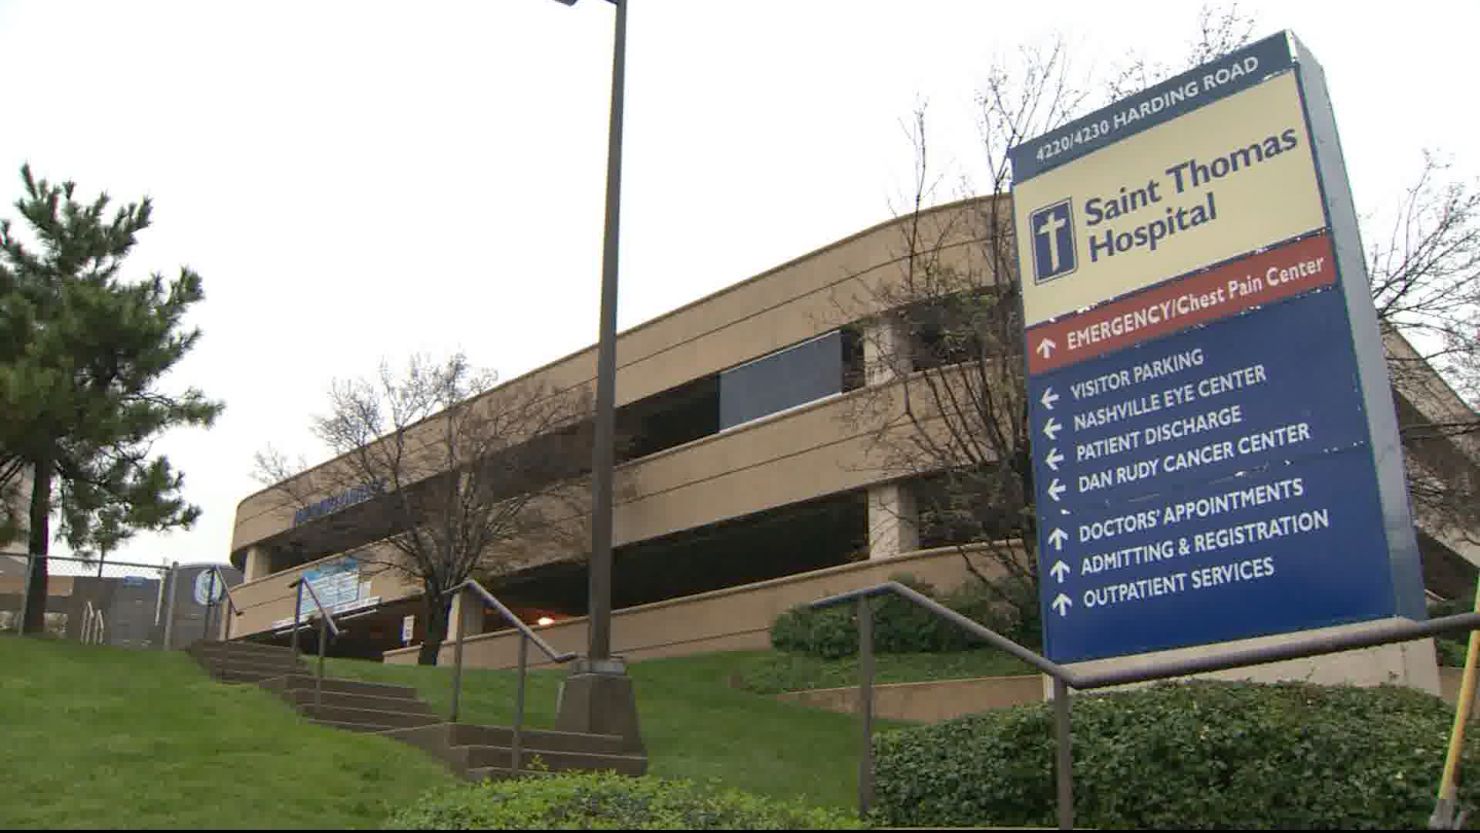 The St. Thomas Outpatient Neurosurgery Center in Nashville, closed due to the outbreak.